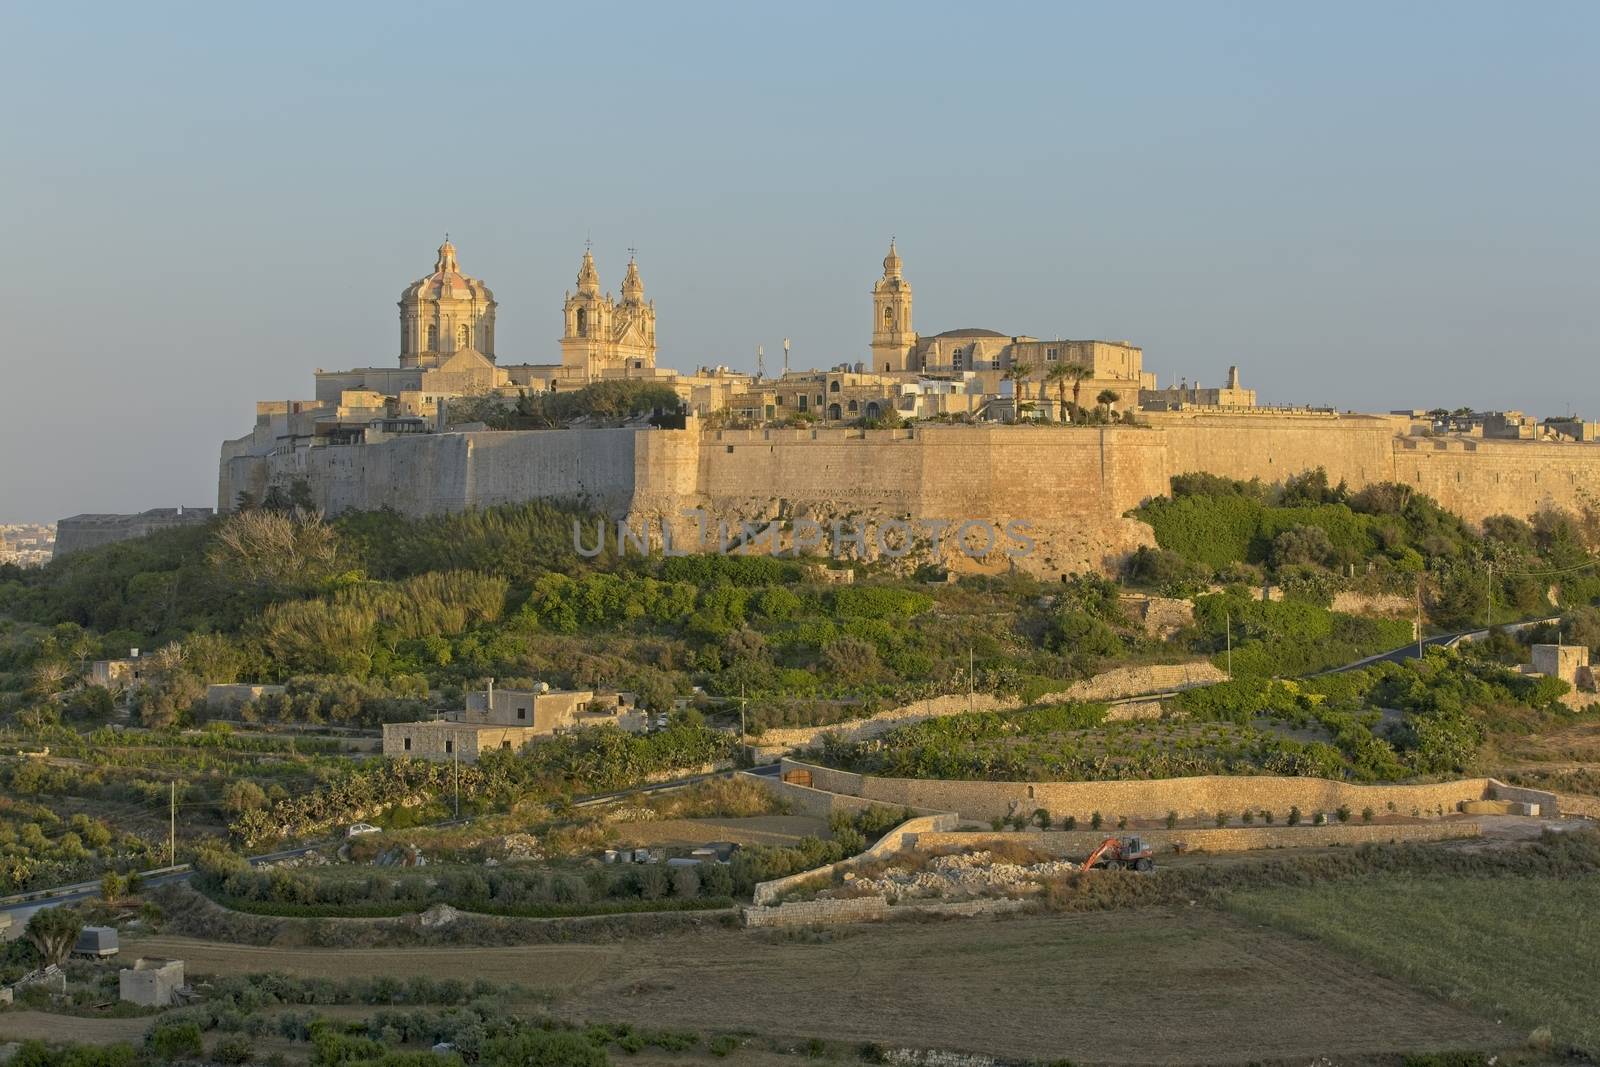 The medieval city of Mdina in Malta, at dusk.